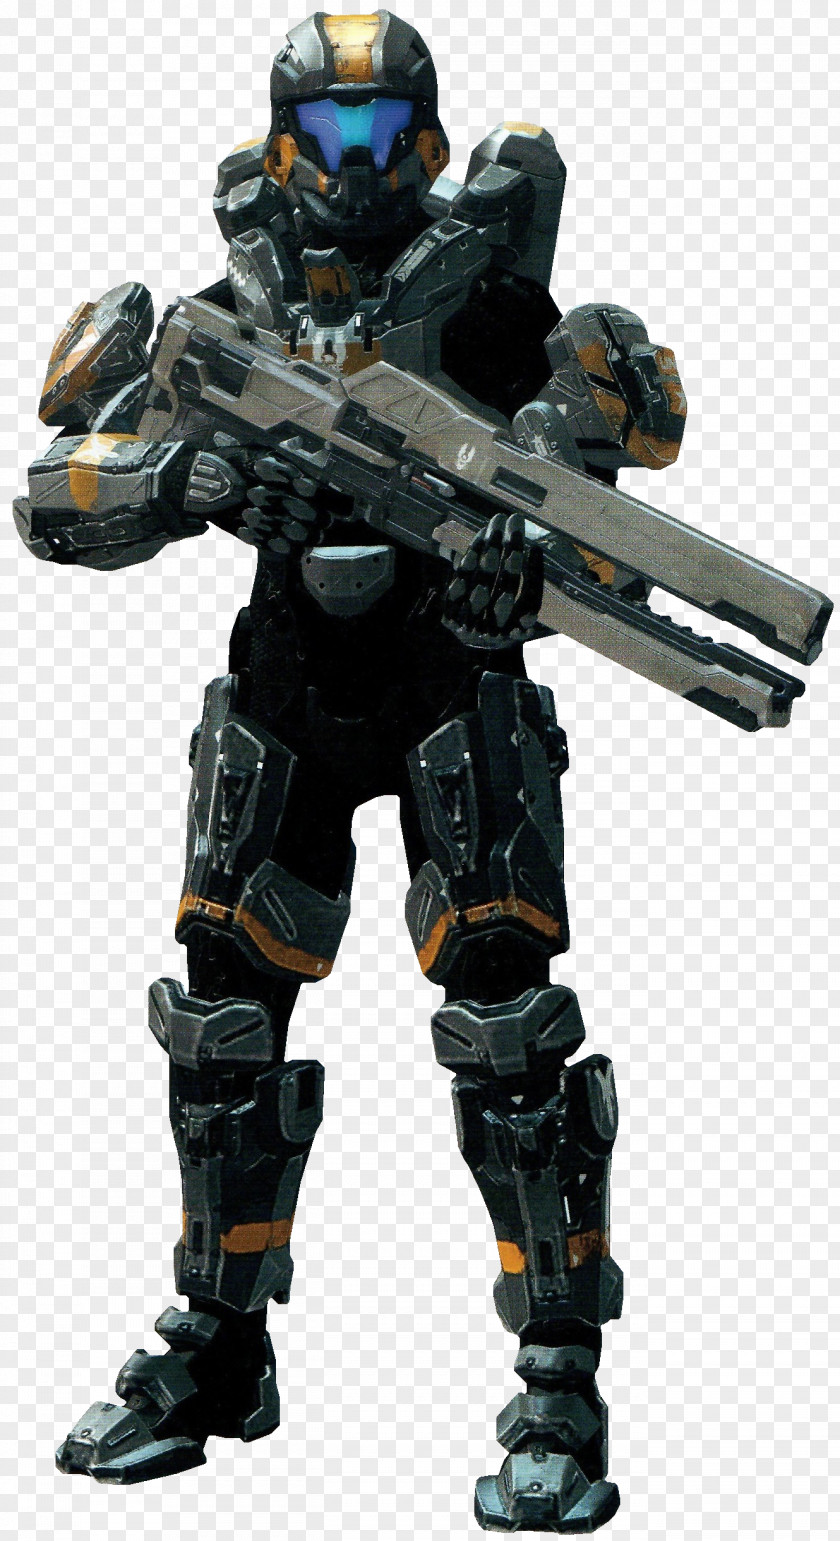 Halo 4 Halo: Reach 5: Guardians Spartan Assault Master Chief PNG